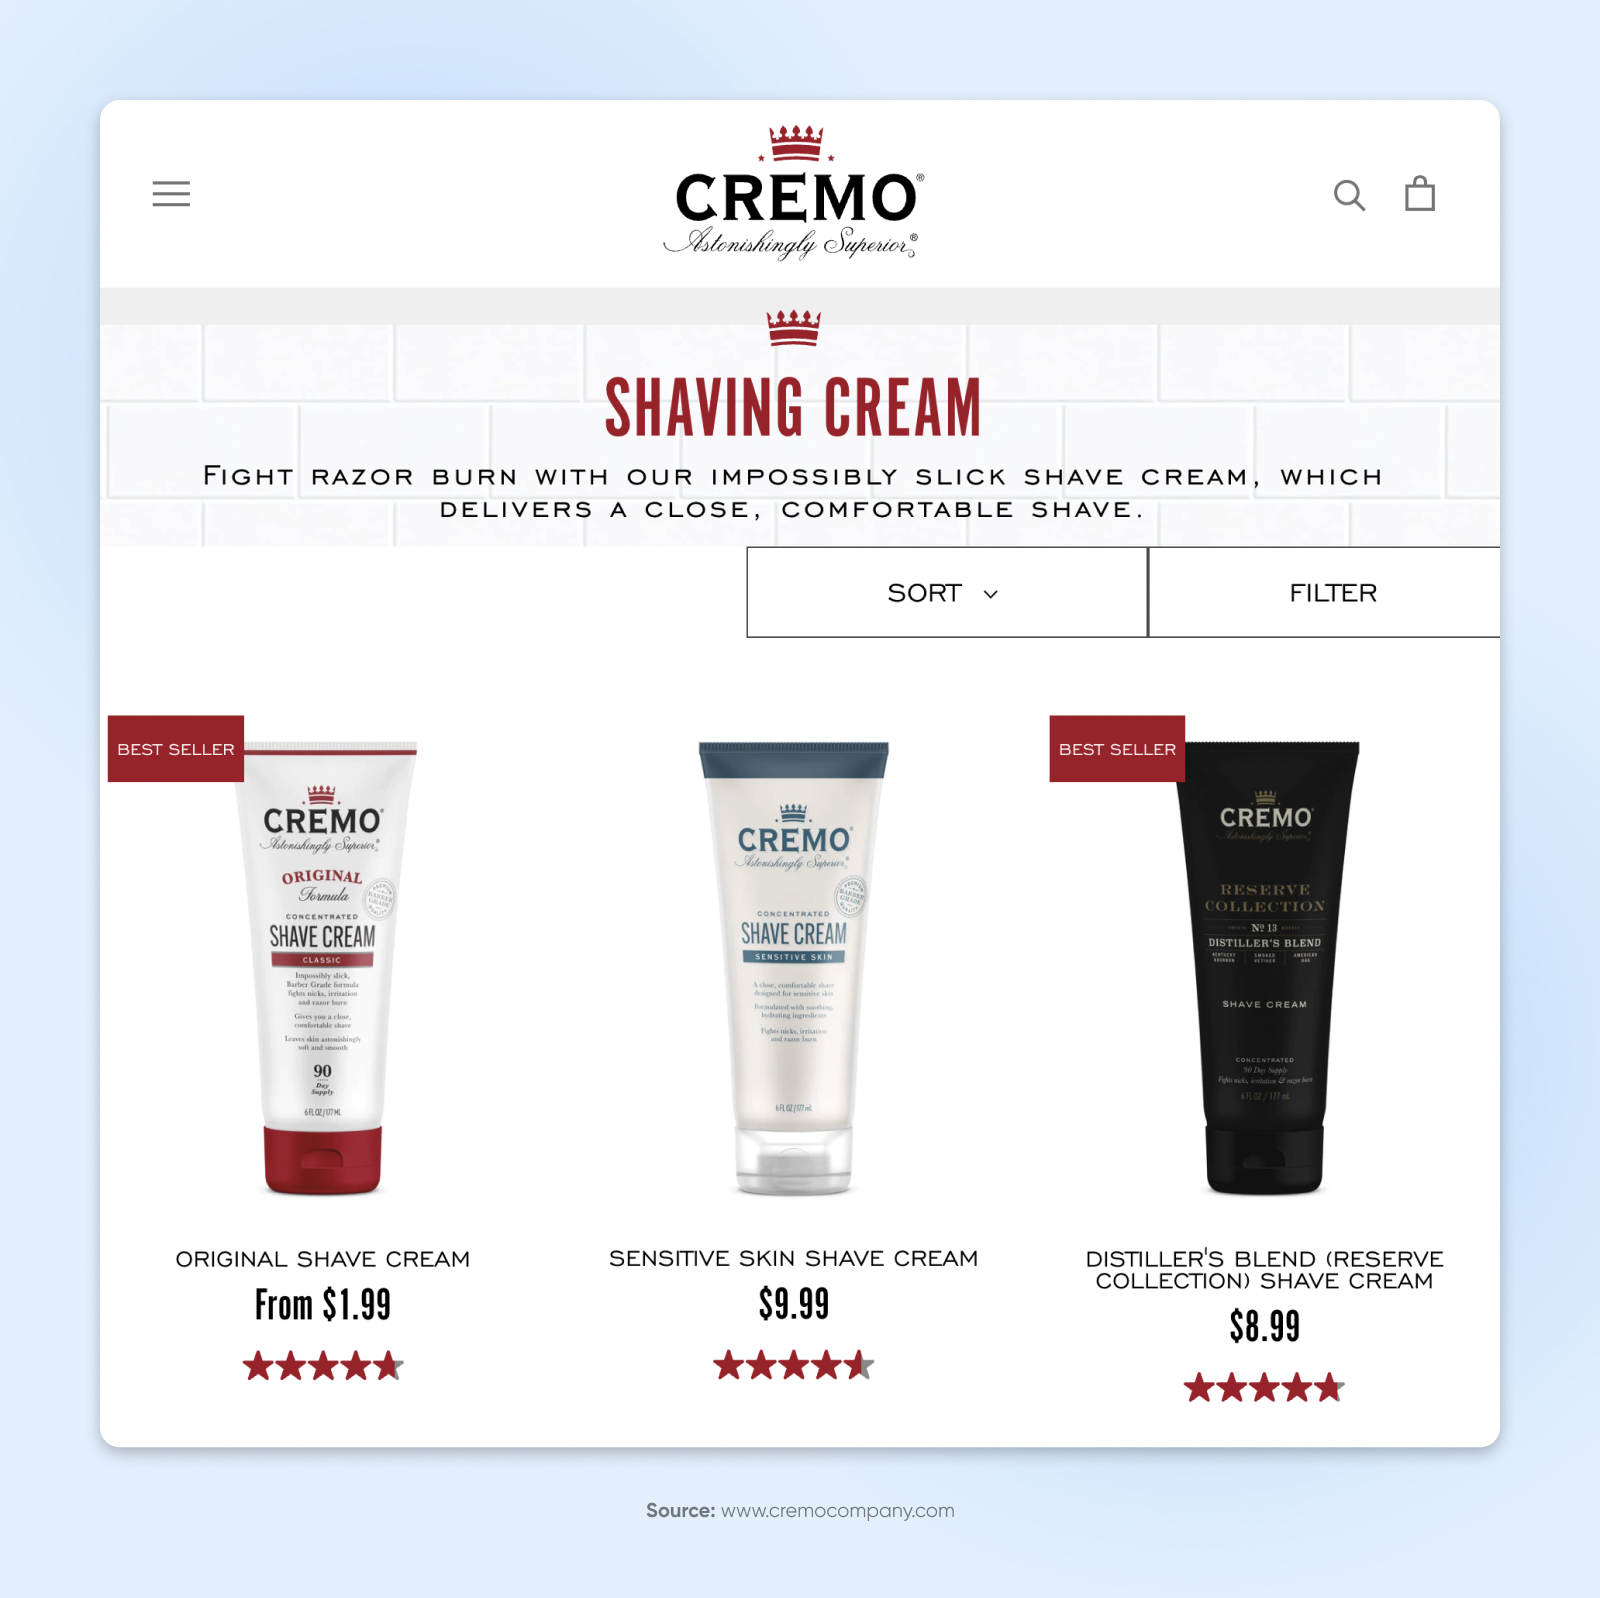 Shaving cream landing page on the Cremo website with three product visuals, titles, prices, and star ratings